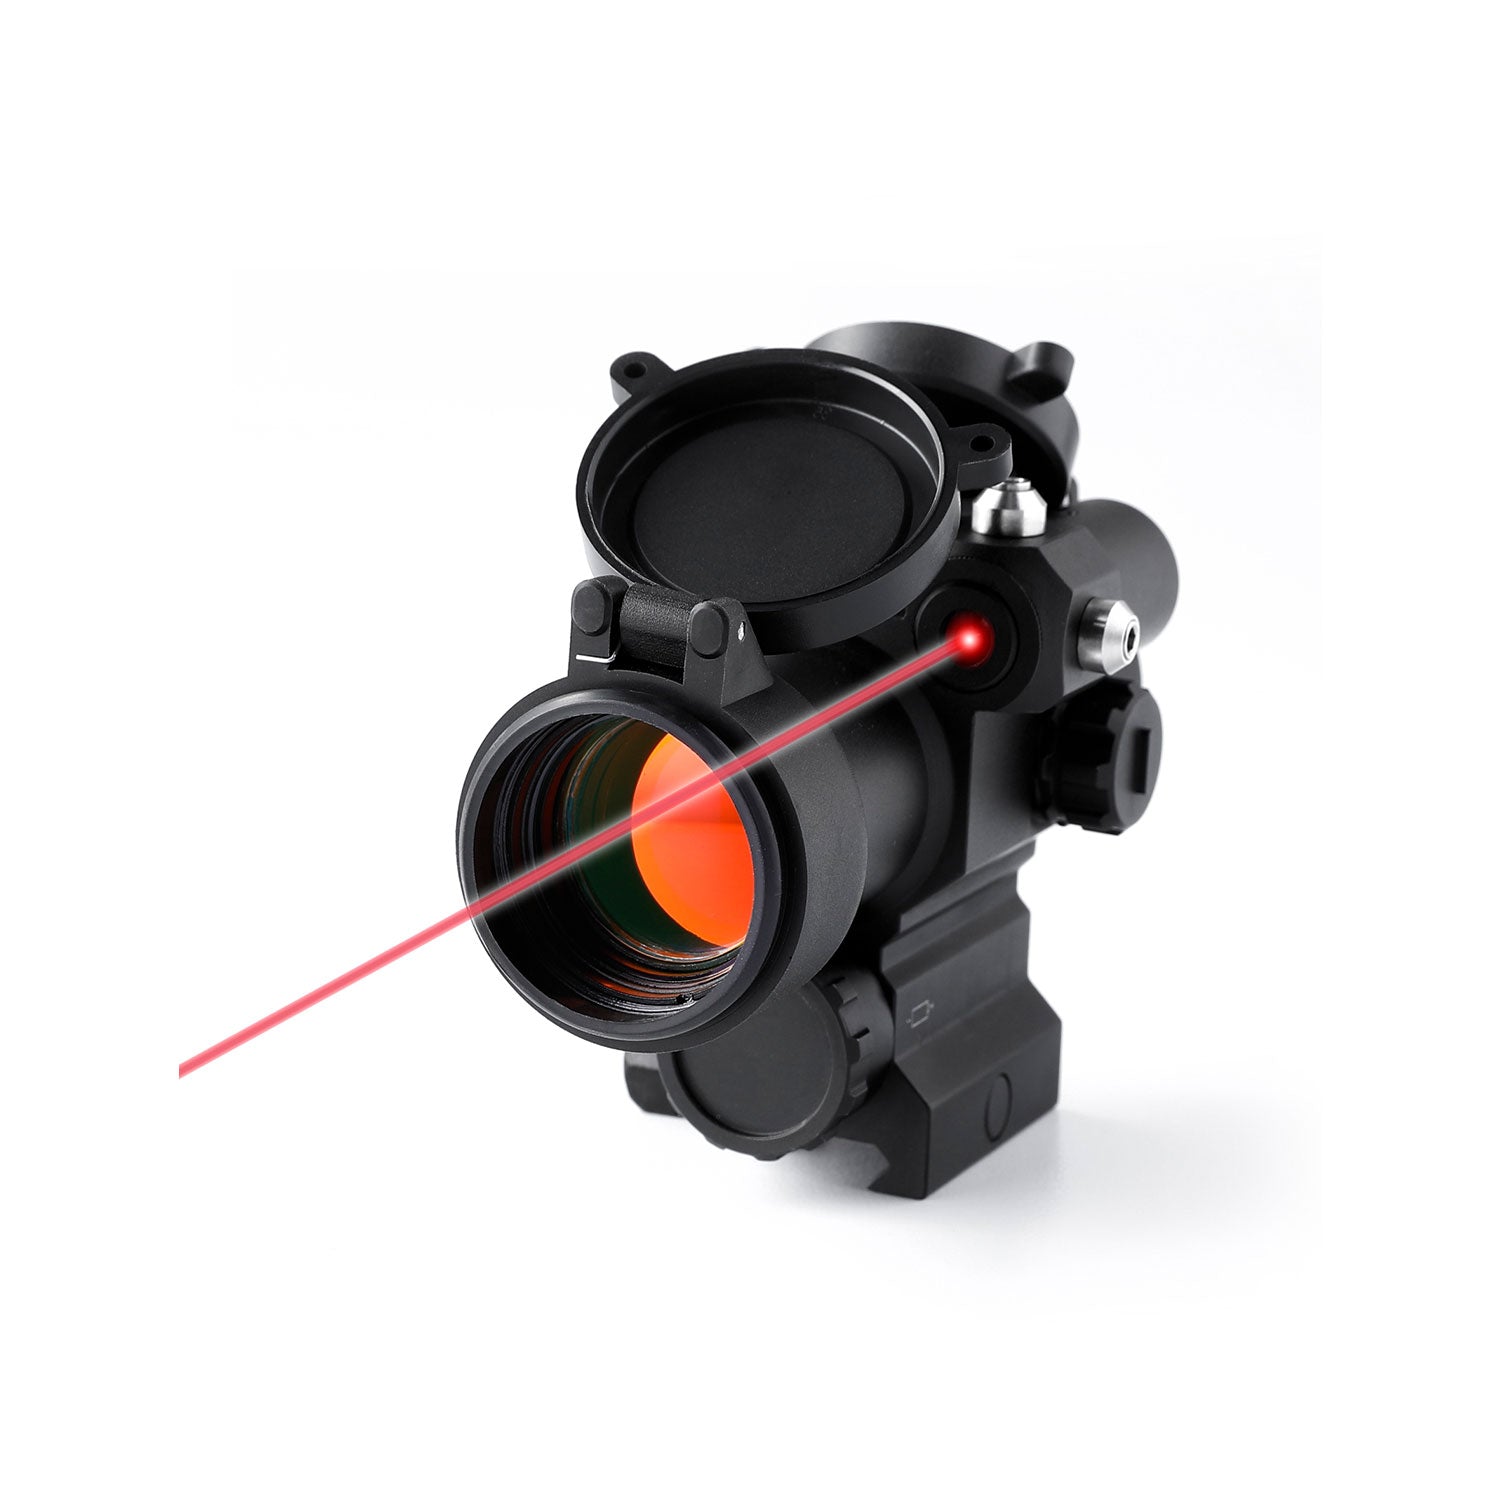 Pro Series 1*30mm Red Dot Sight with Red Laser, 2 MOA